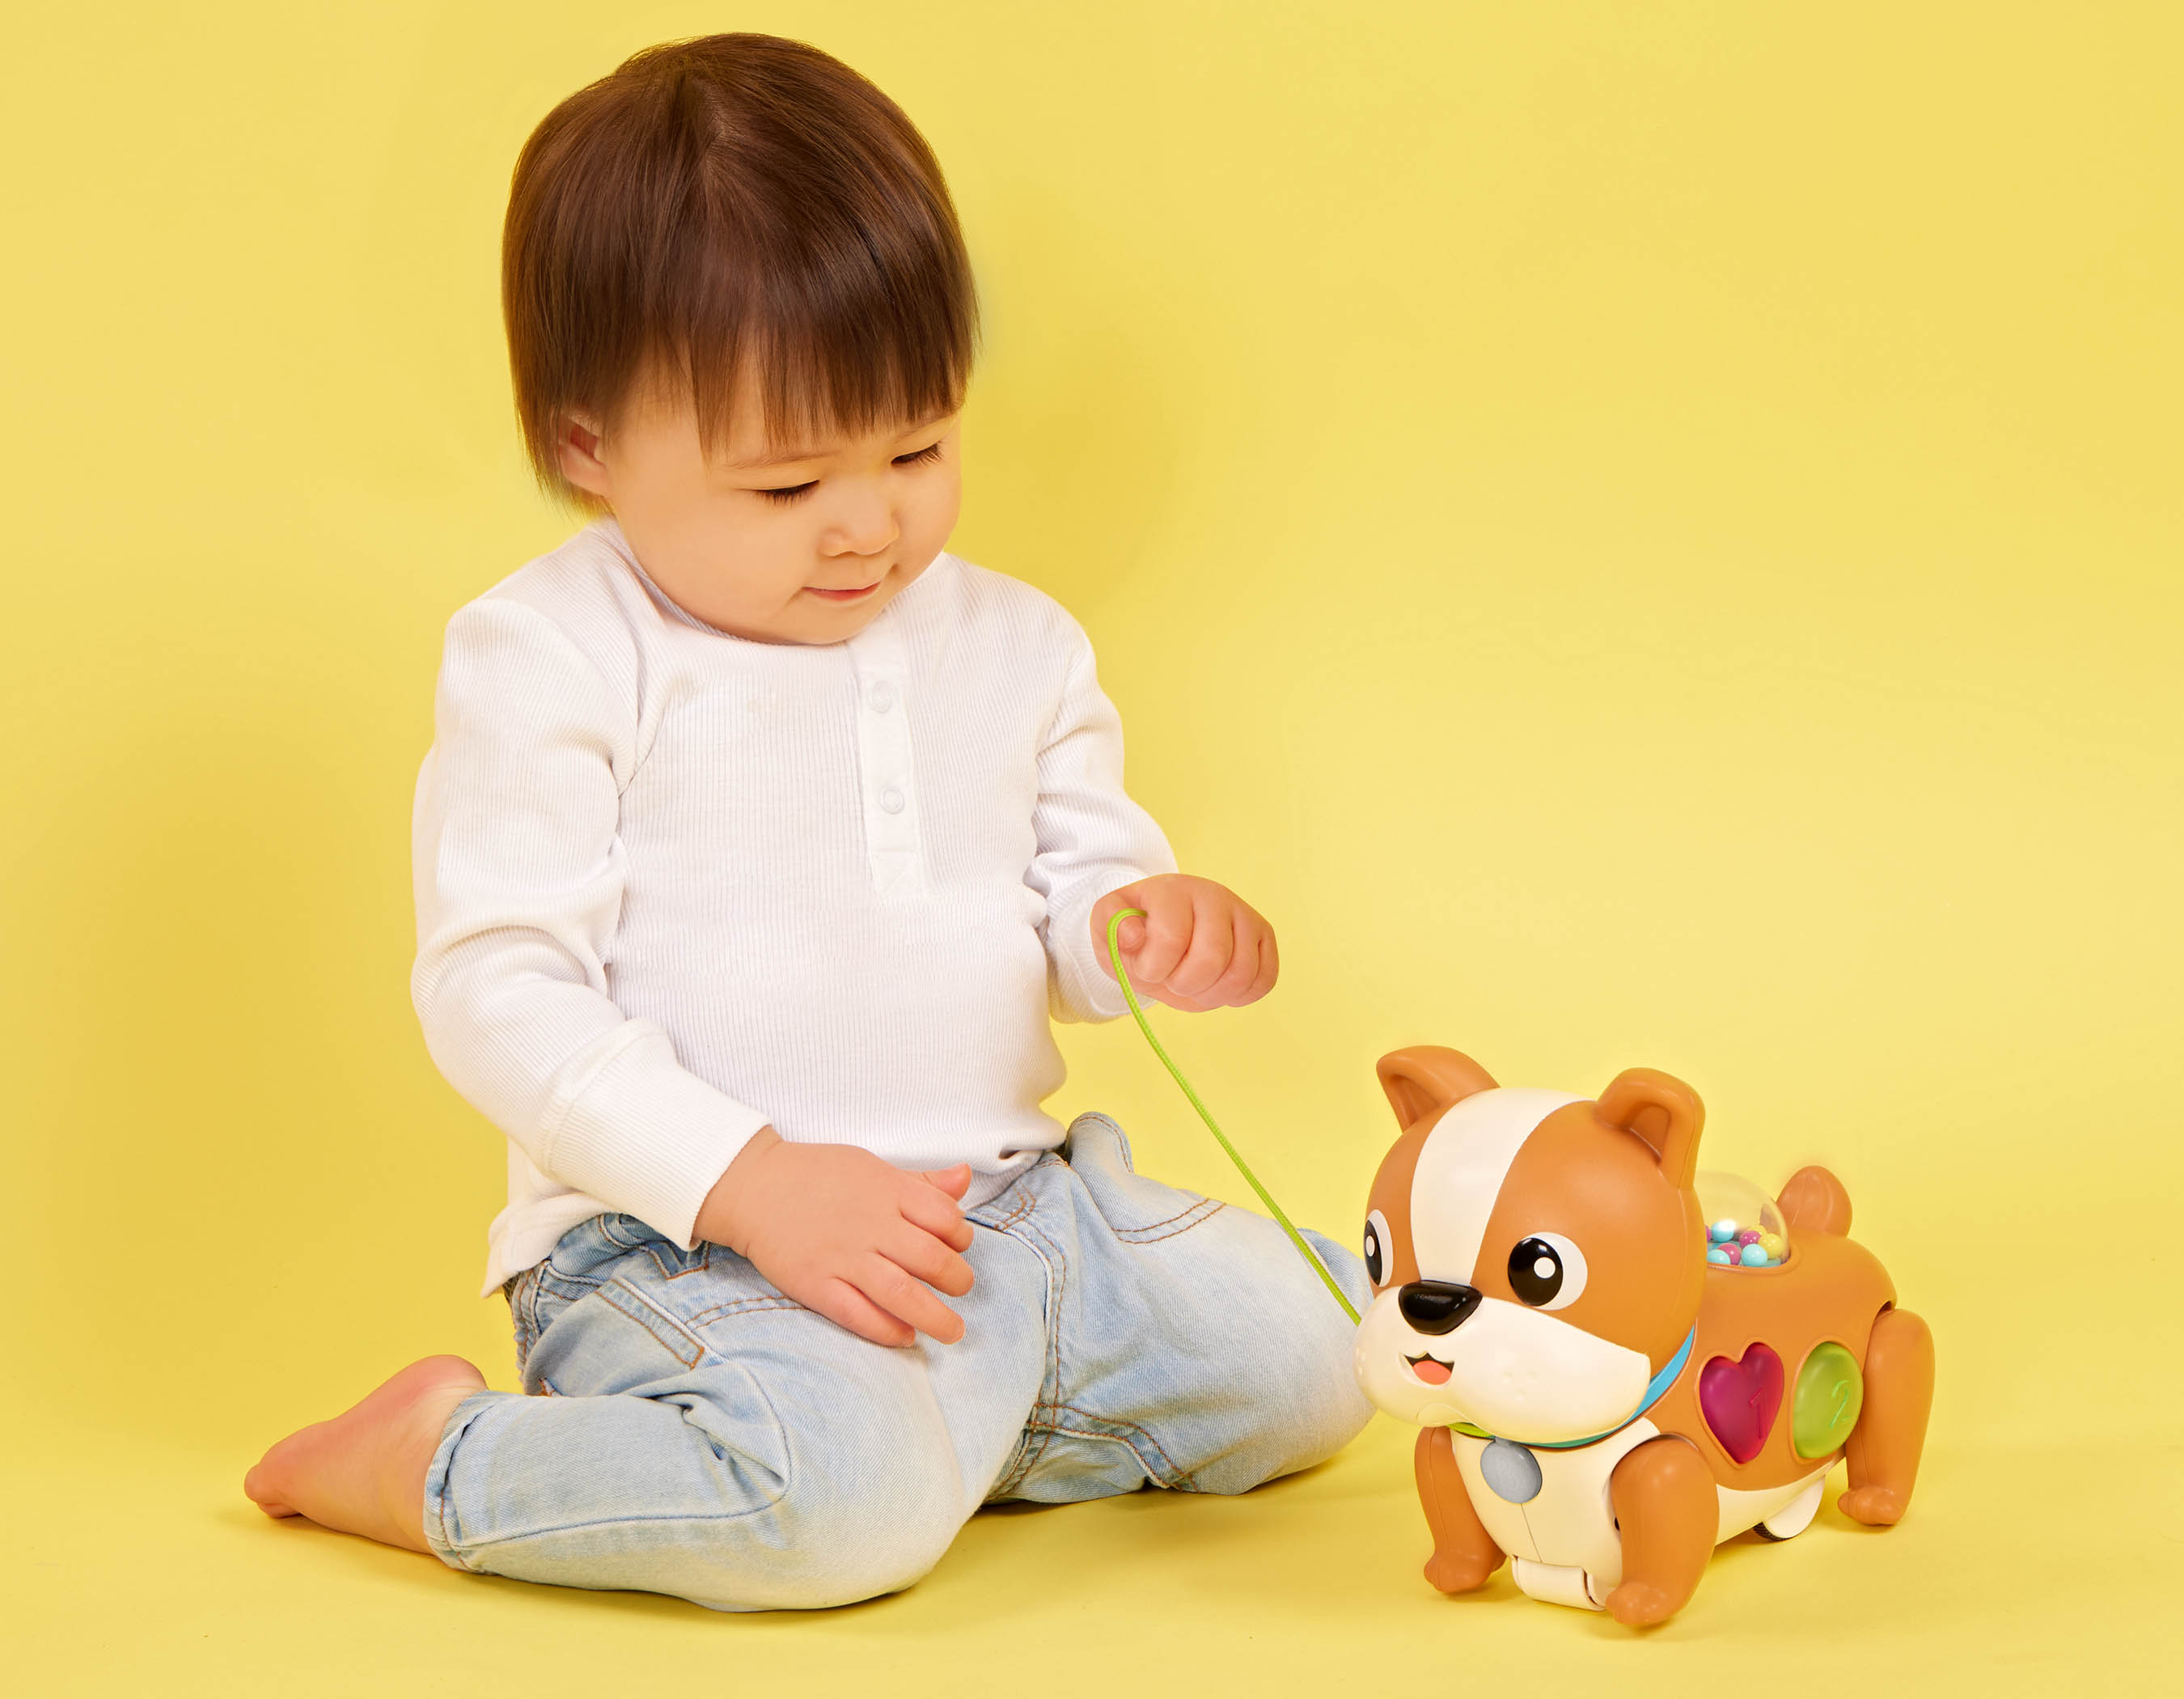 Baby Learning Toys  Wooden Baby Toys to Help Little Learners